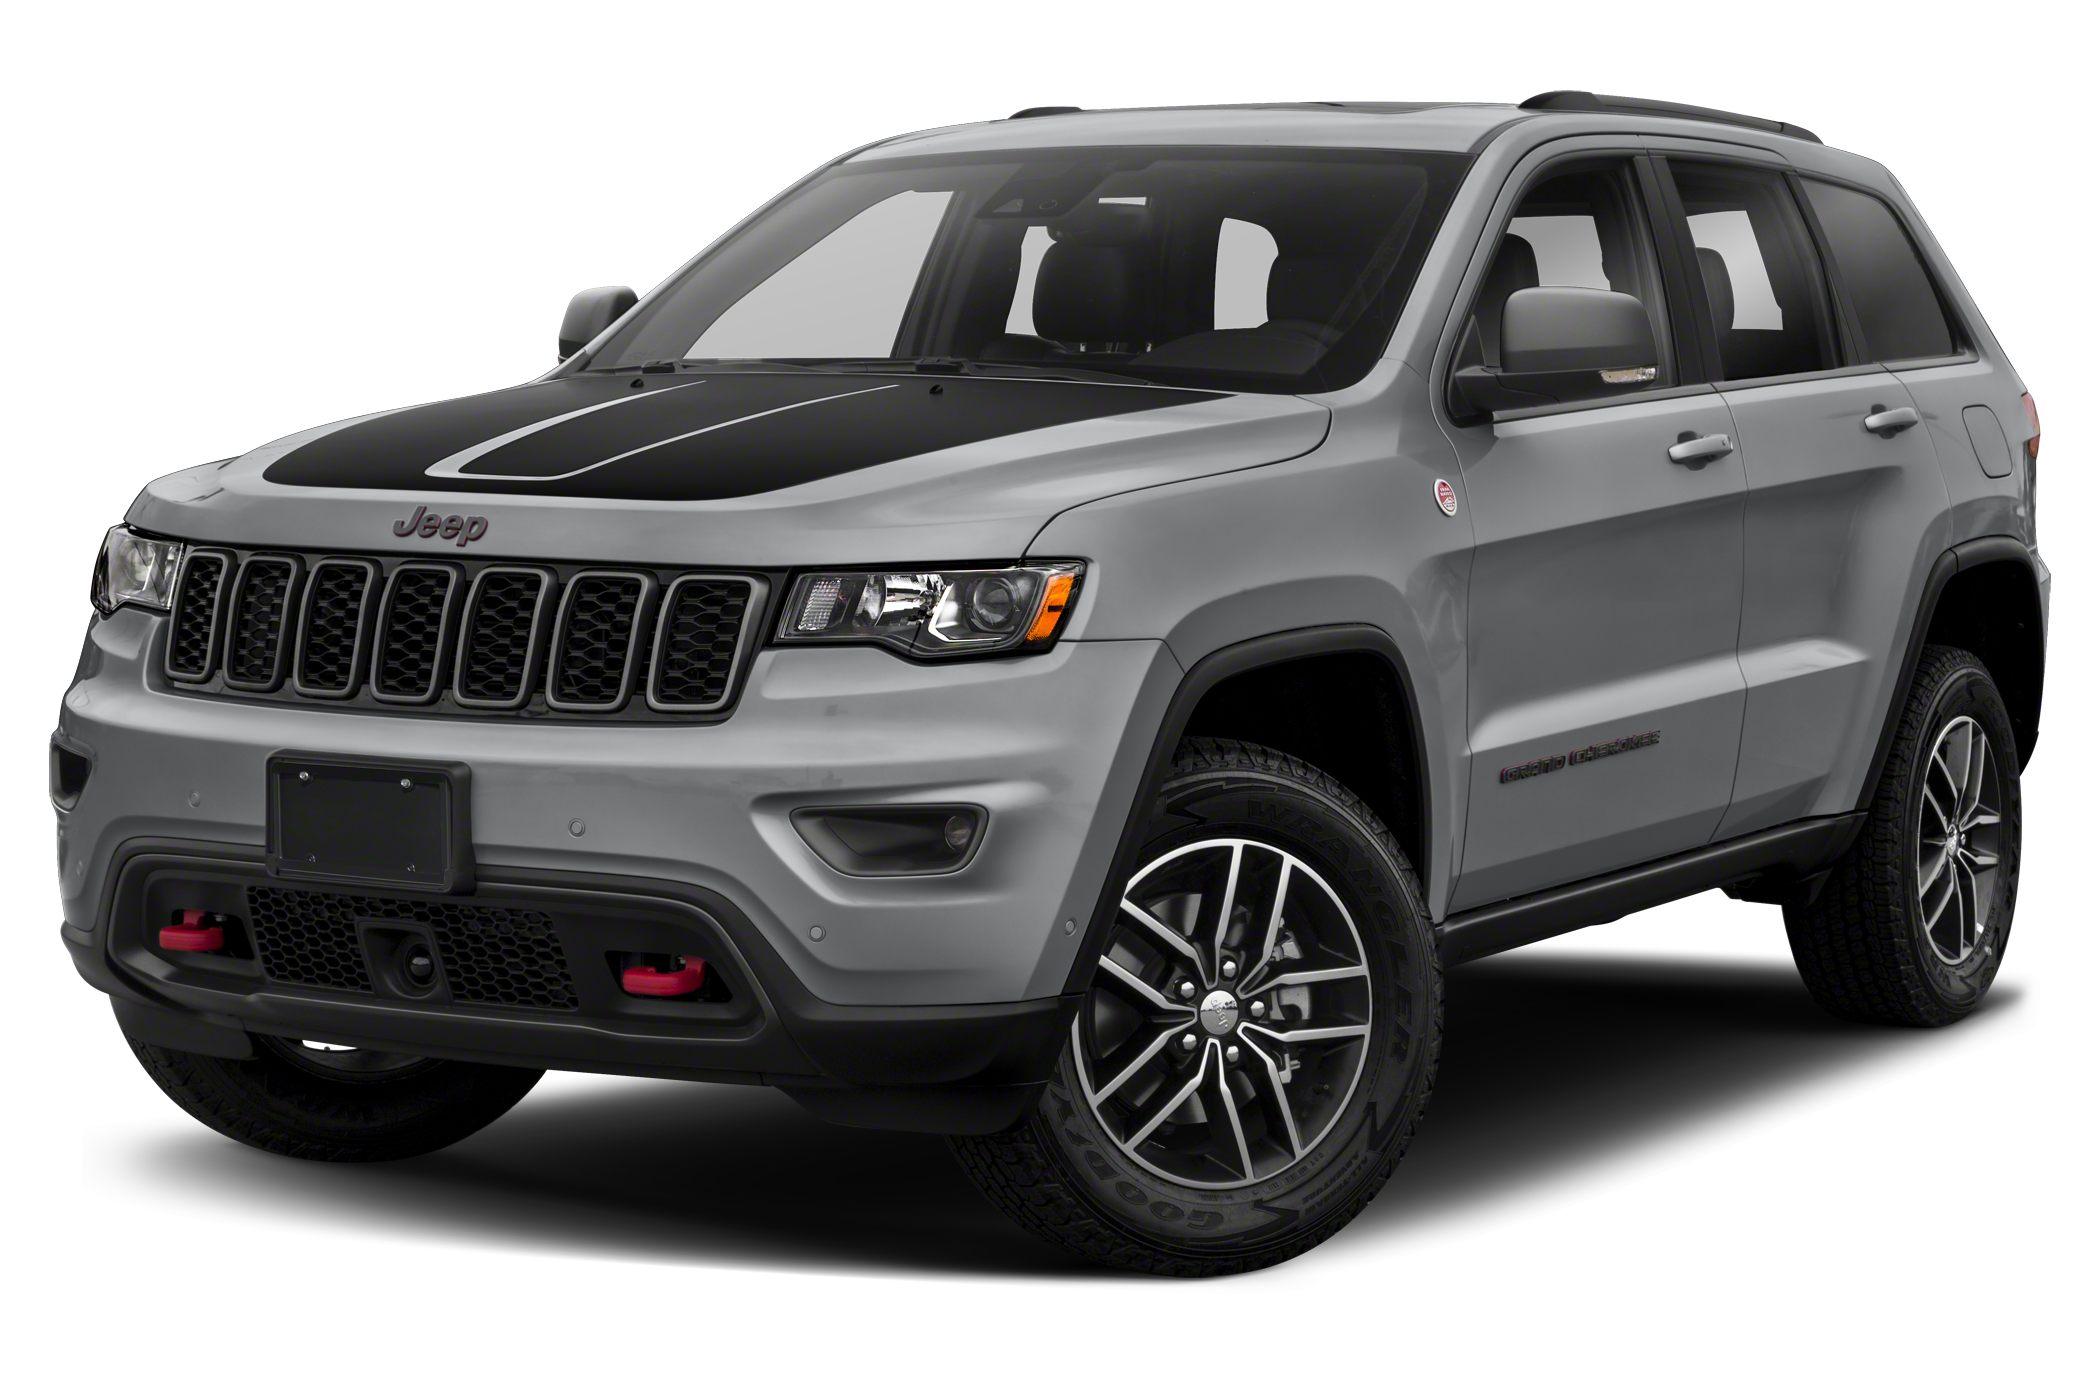 Jeep Grand Cherokee Trailhawk 4dr 4x4 Picture